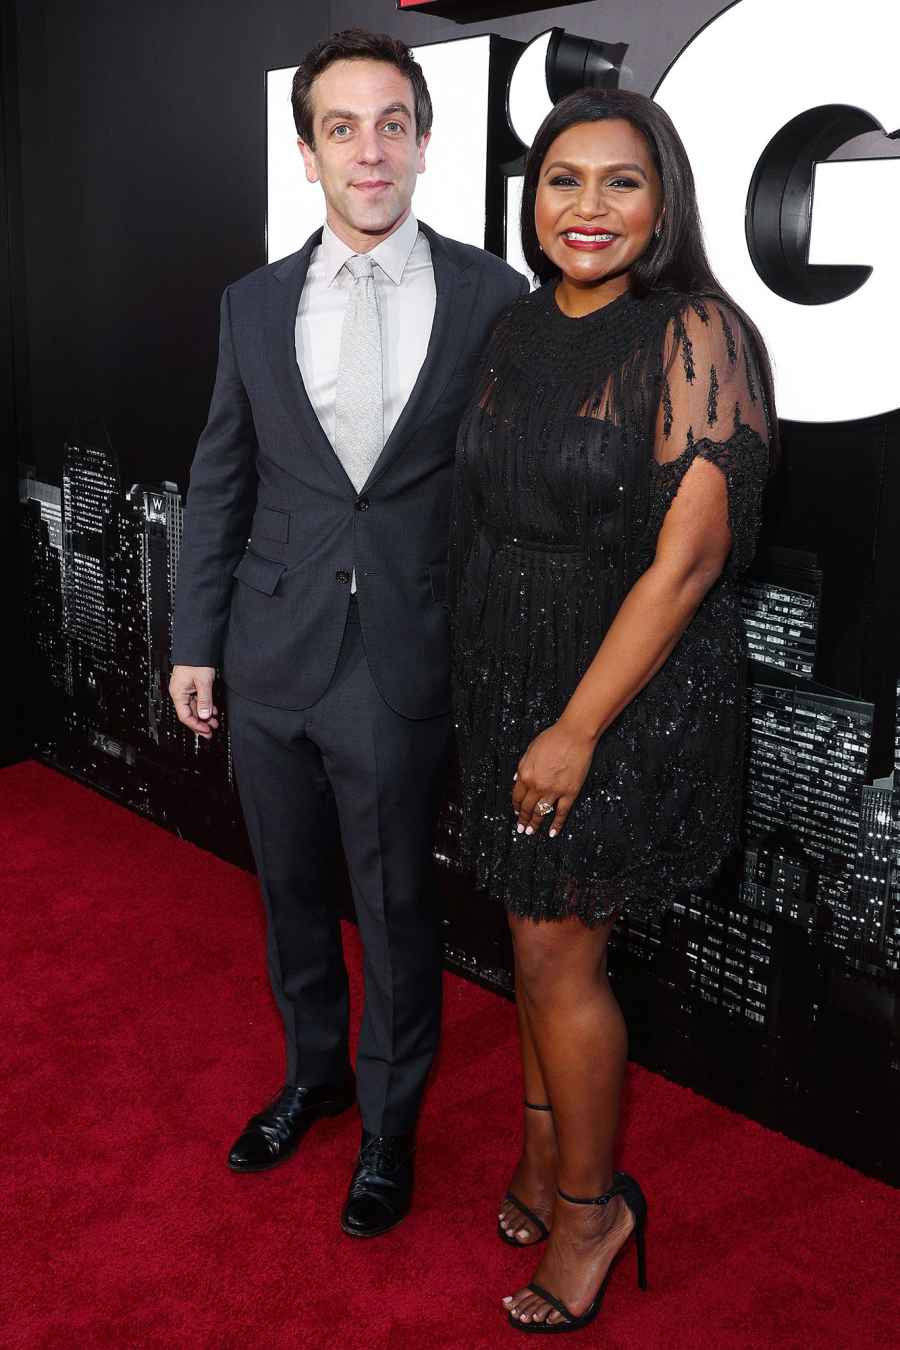 2019 Part Of My Family Mindy Kaling and BJ Novak Friendship